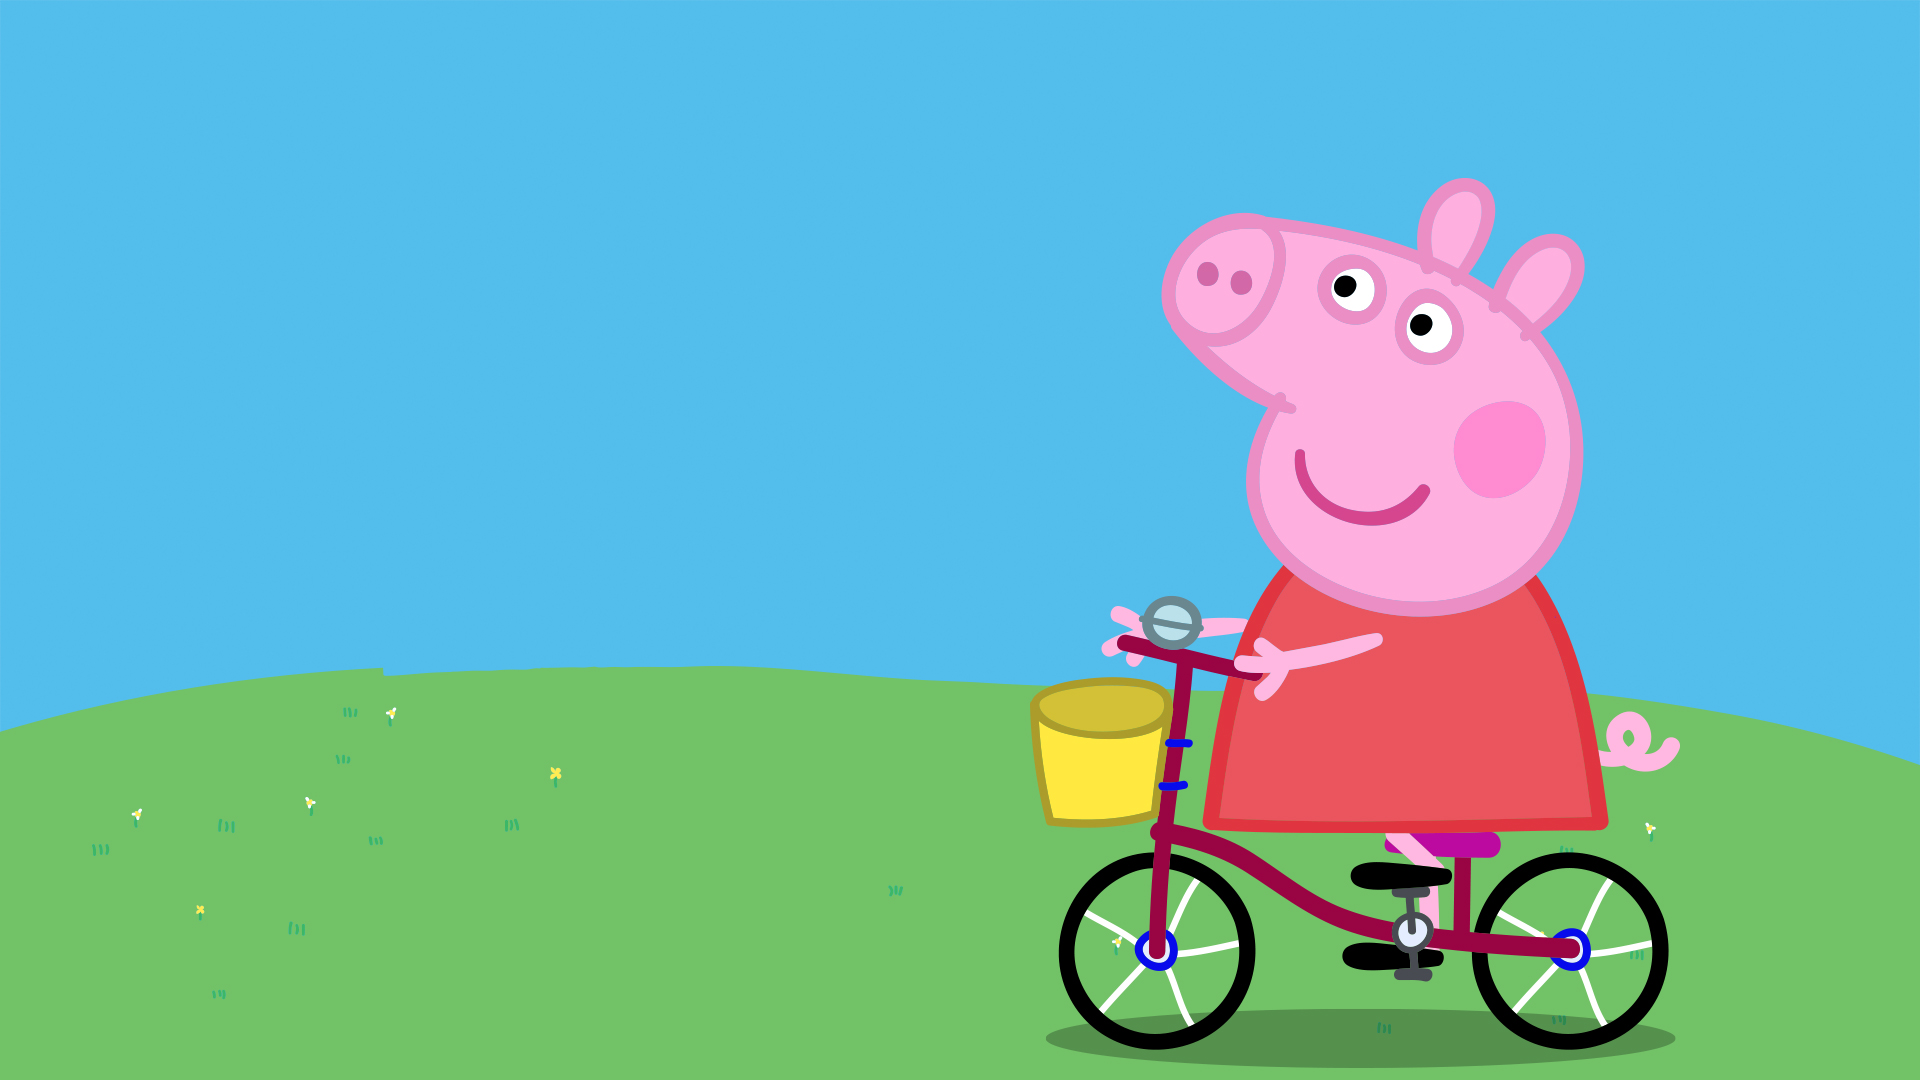 Free download Peppa Pig Wallpaper Hd 2591411 HD Wallpaper Backgrounds  [1920x1080] for your Desktop, Mobile & Tablet | Explore 37+ Peppa Pig House  Wallpapers | Guinea Pig Wallpaper, Cute Pig Wallpaper, Pig Wallpaper